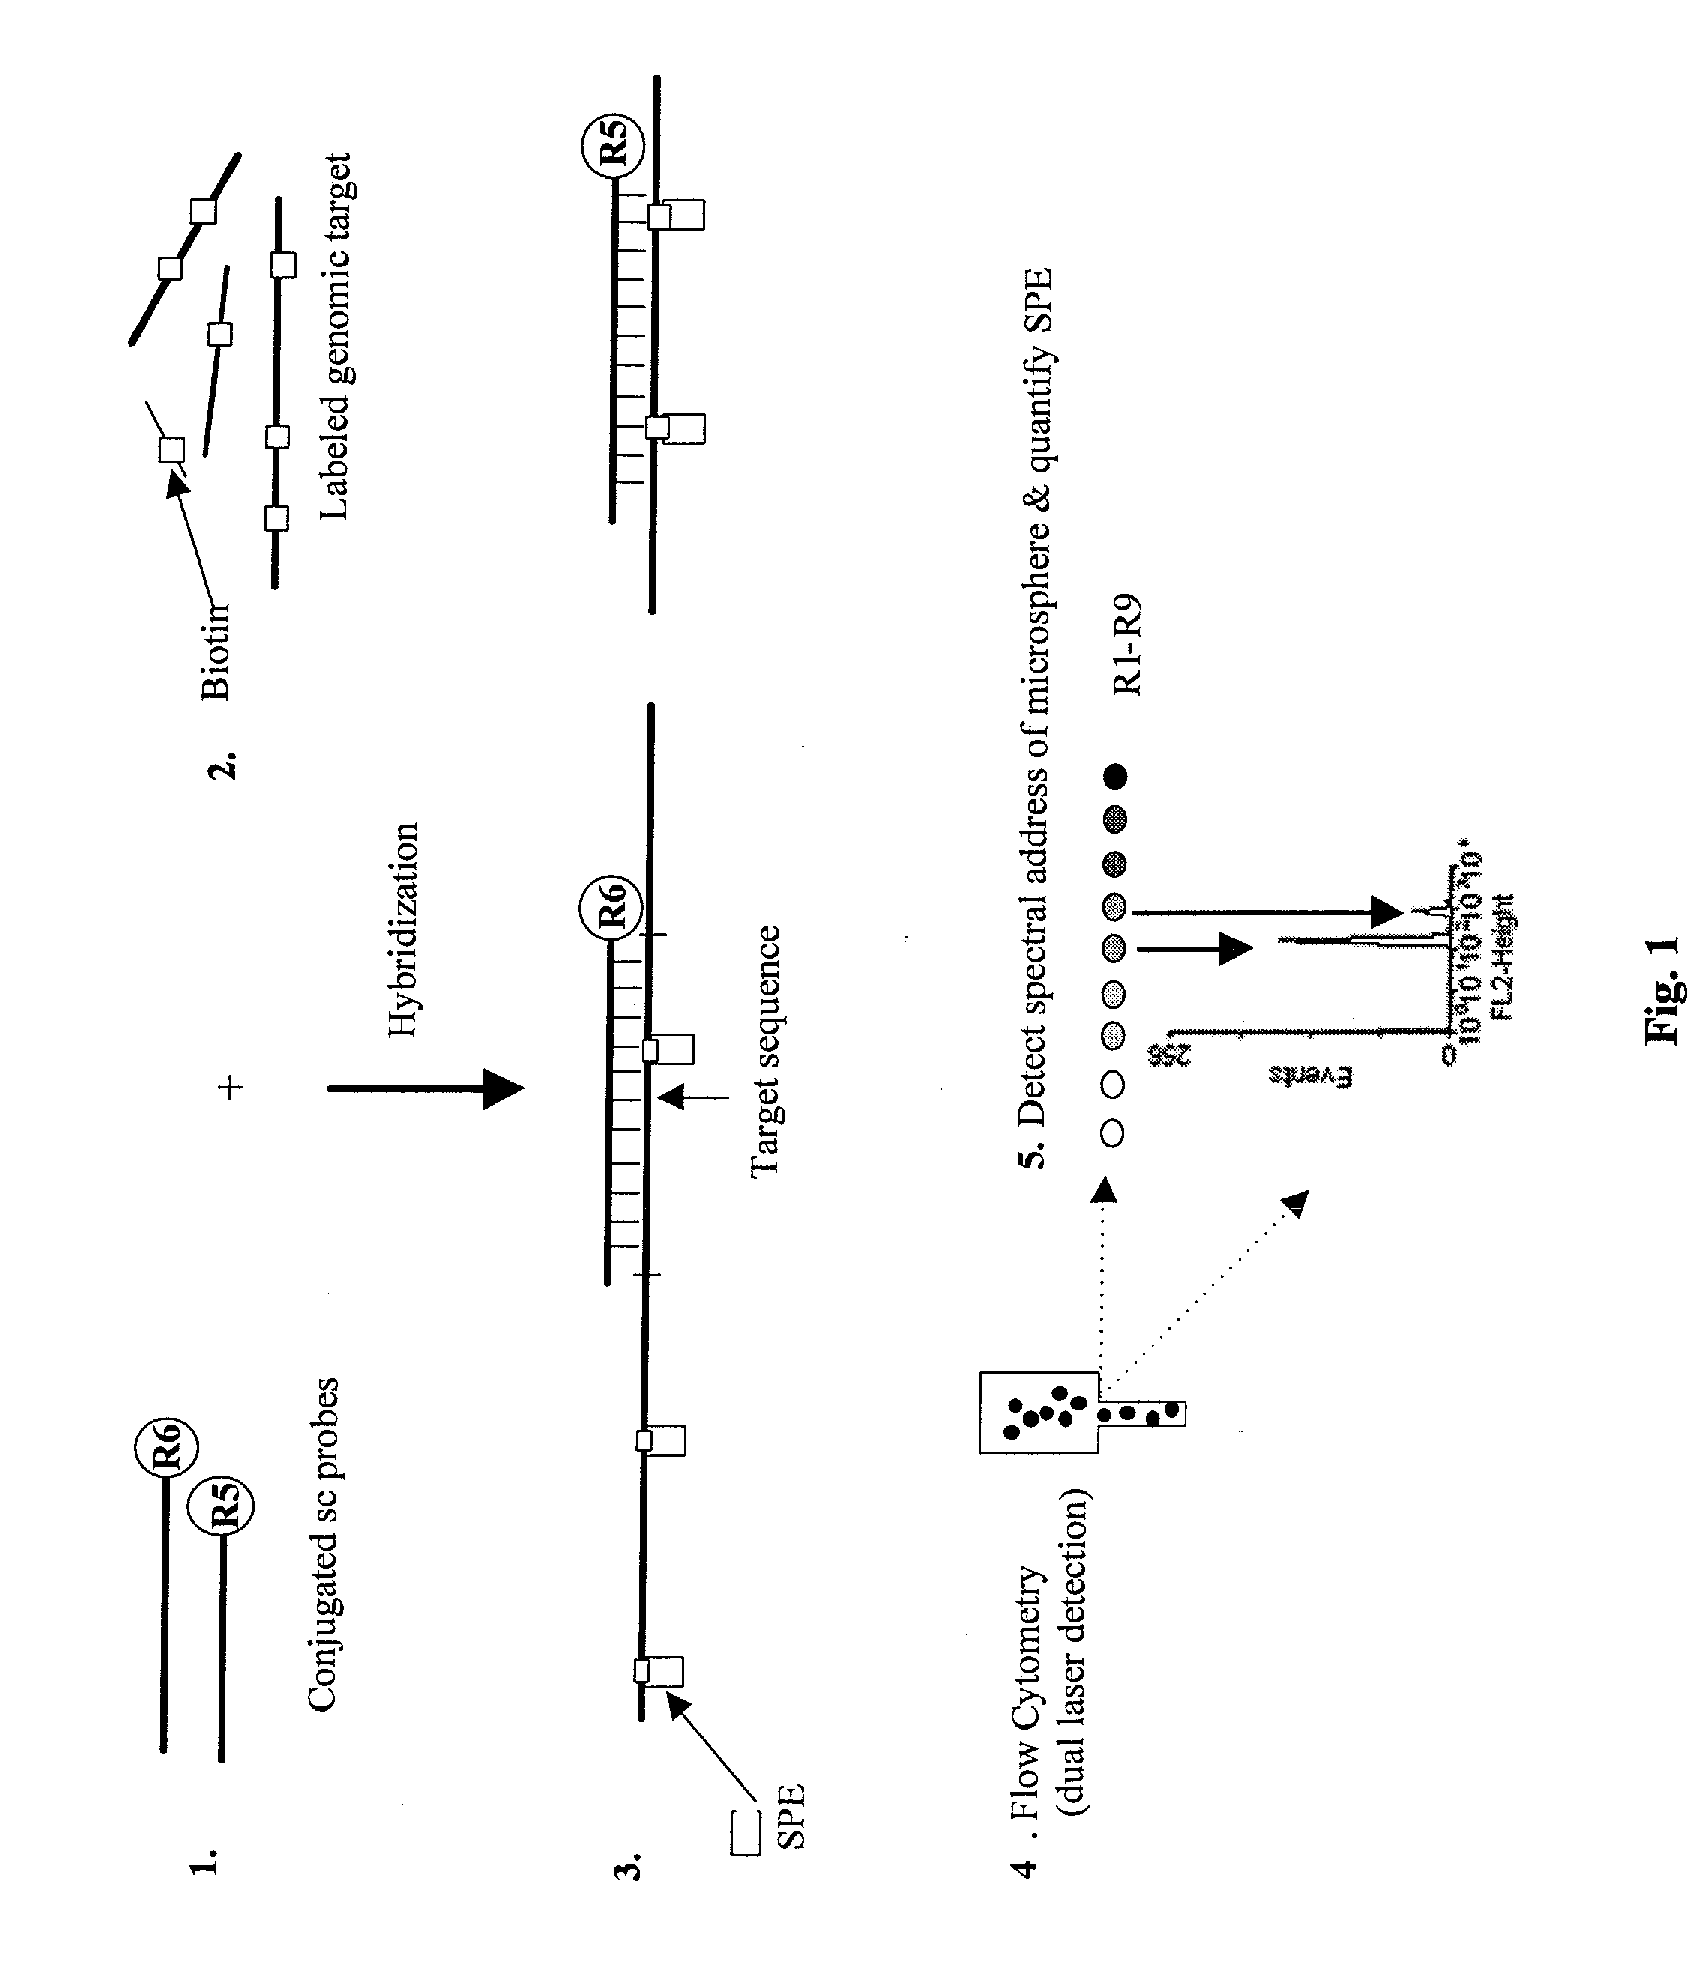 Quantification of microsphere suspension hybridization and uses thereof